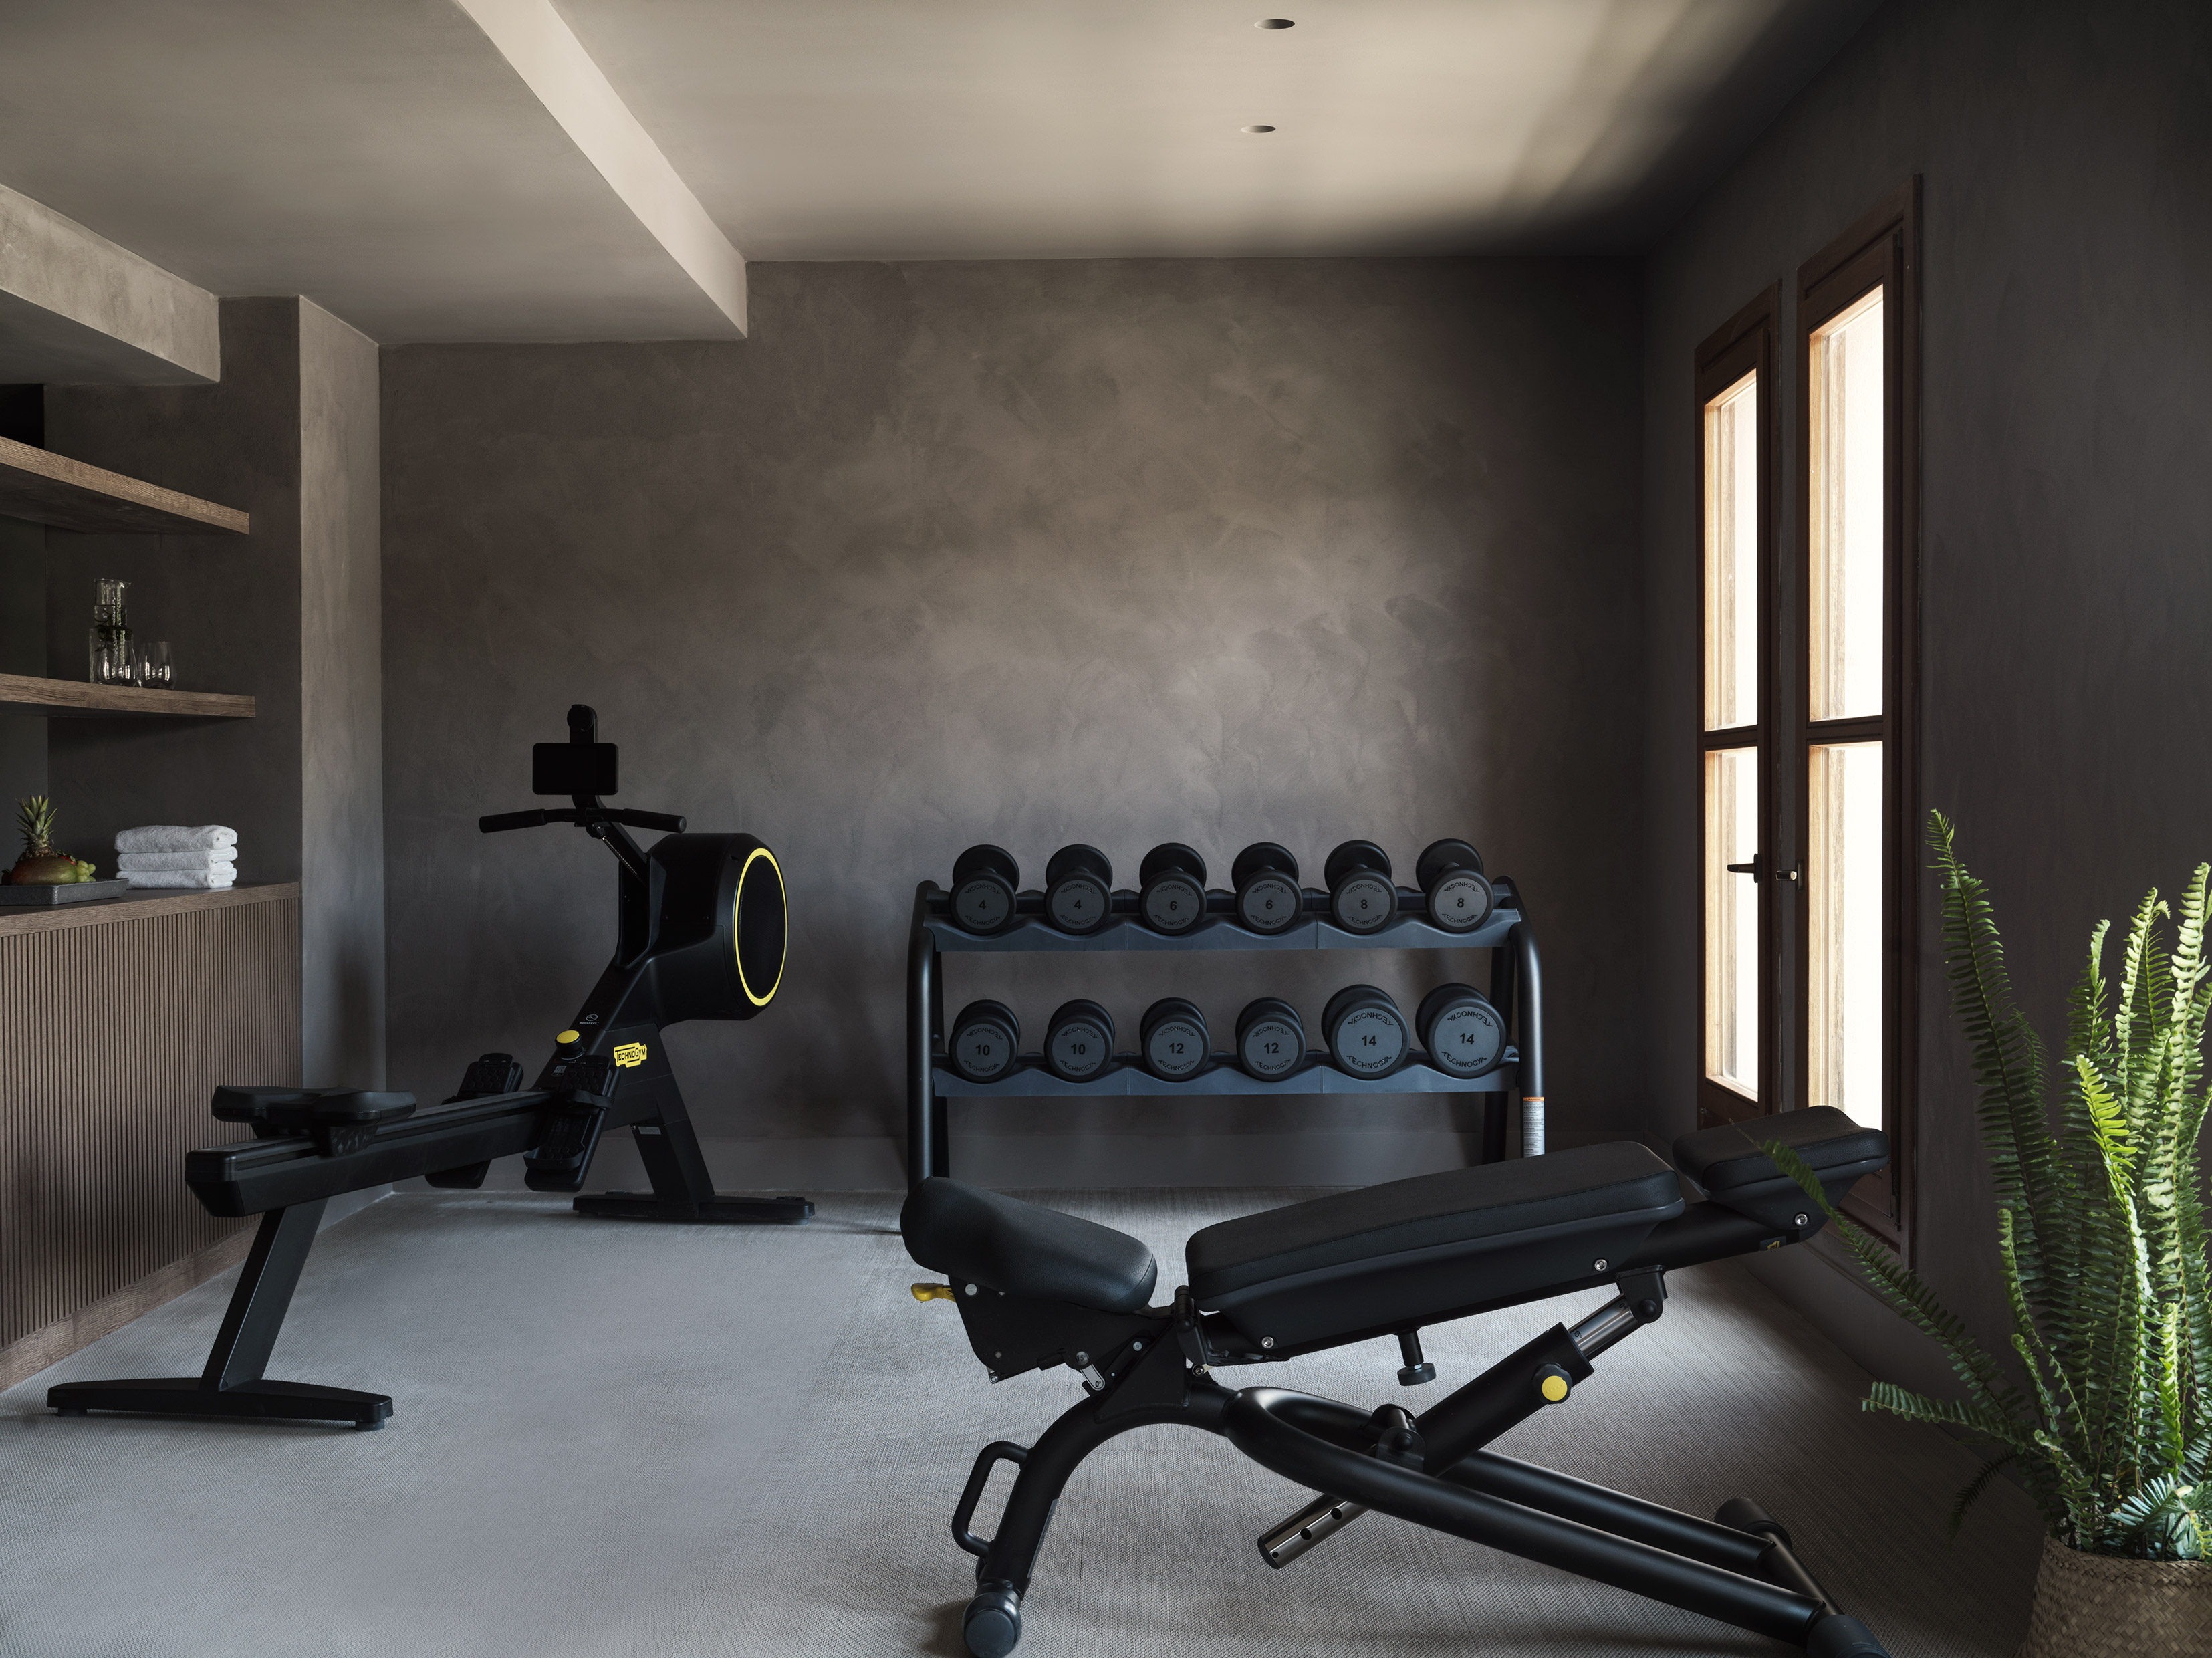 9 Gym Designs to Make Working Out a Breeze - Interior Design